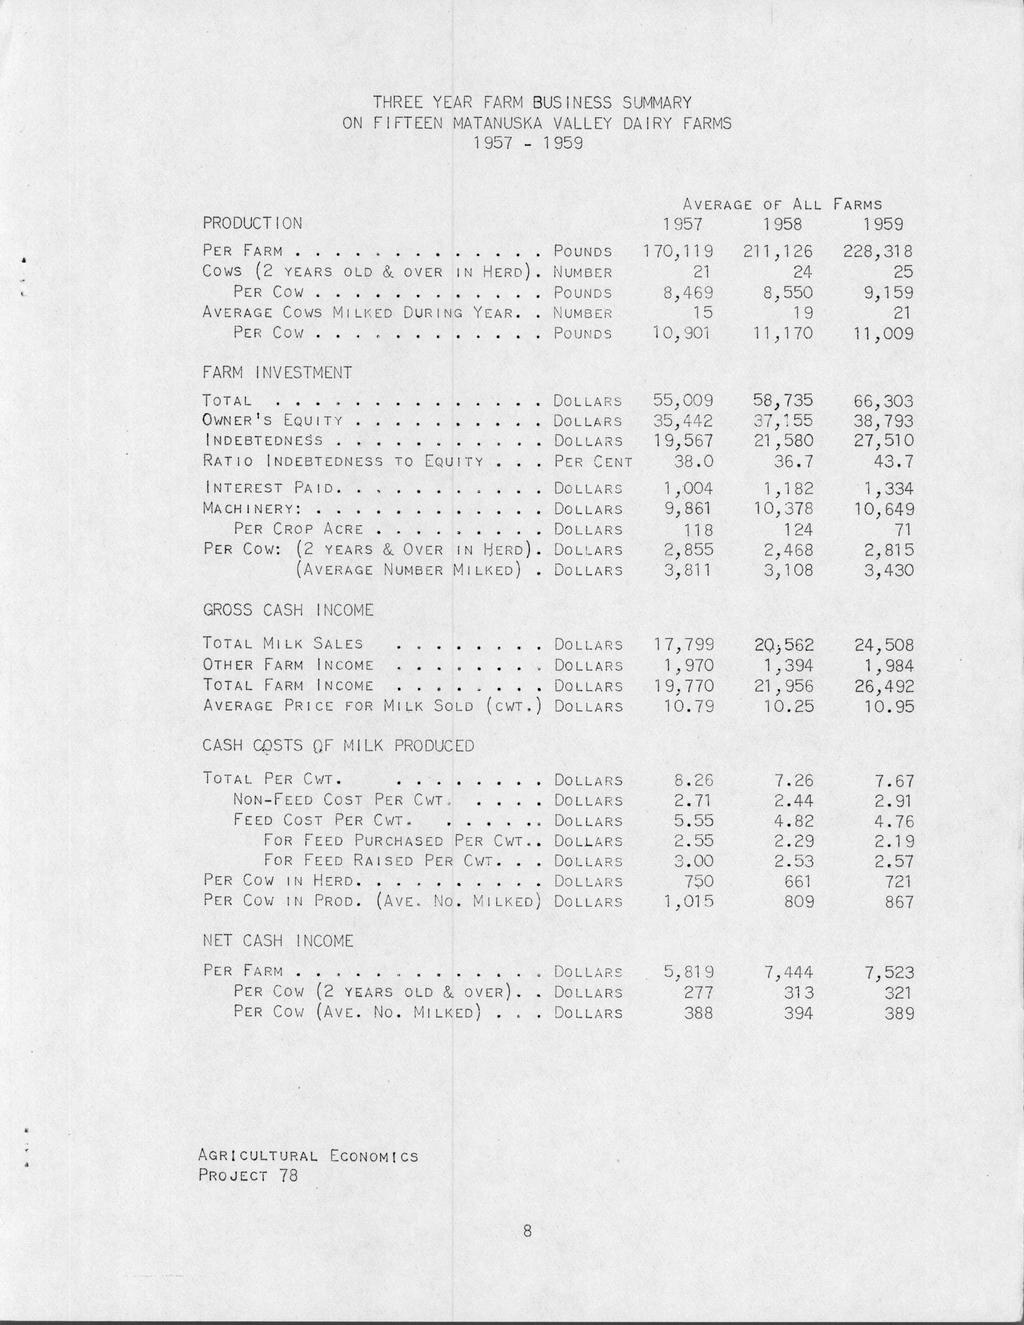 THREE YEAR FARM BUSINESS SUMMARY ON FIFTEEN MATANUSKA VALLEY DAIRY FARMS 1957-1959 A verage of A ll Farms PRODUCTION 1957 1 958 1959 Per Farm... Pounds 1 70,119 211,126 228,318 Cows (2 YEARS OLD &.